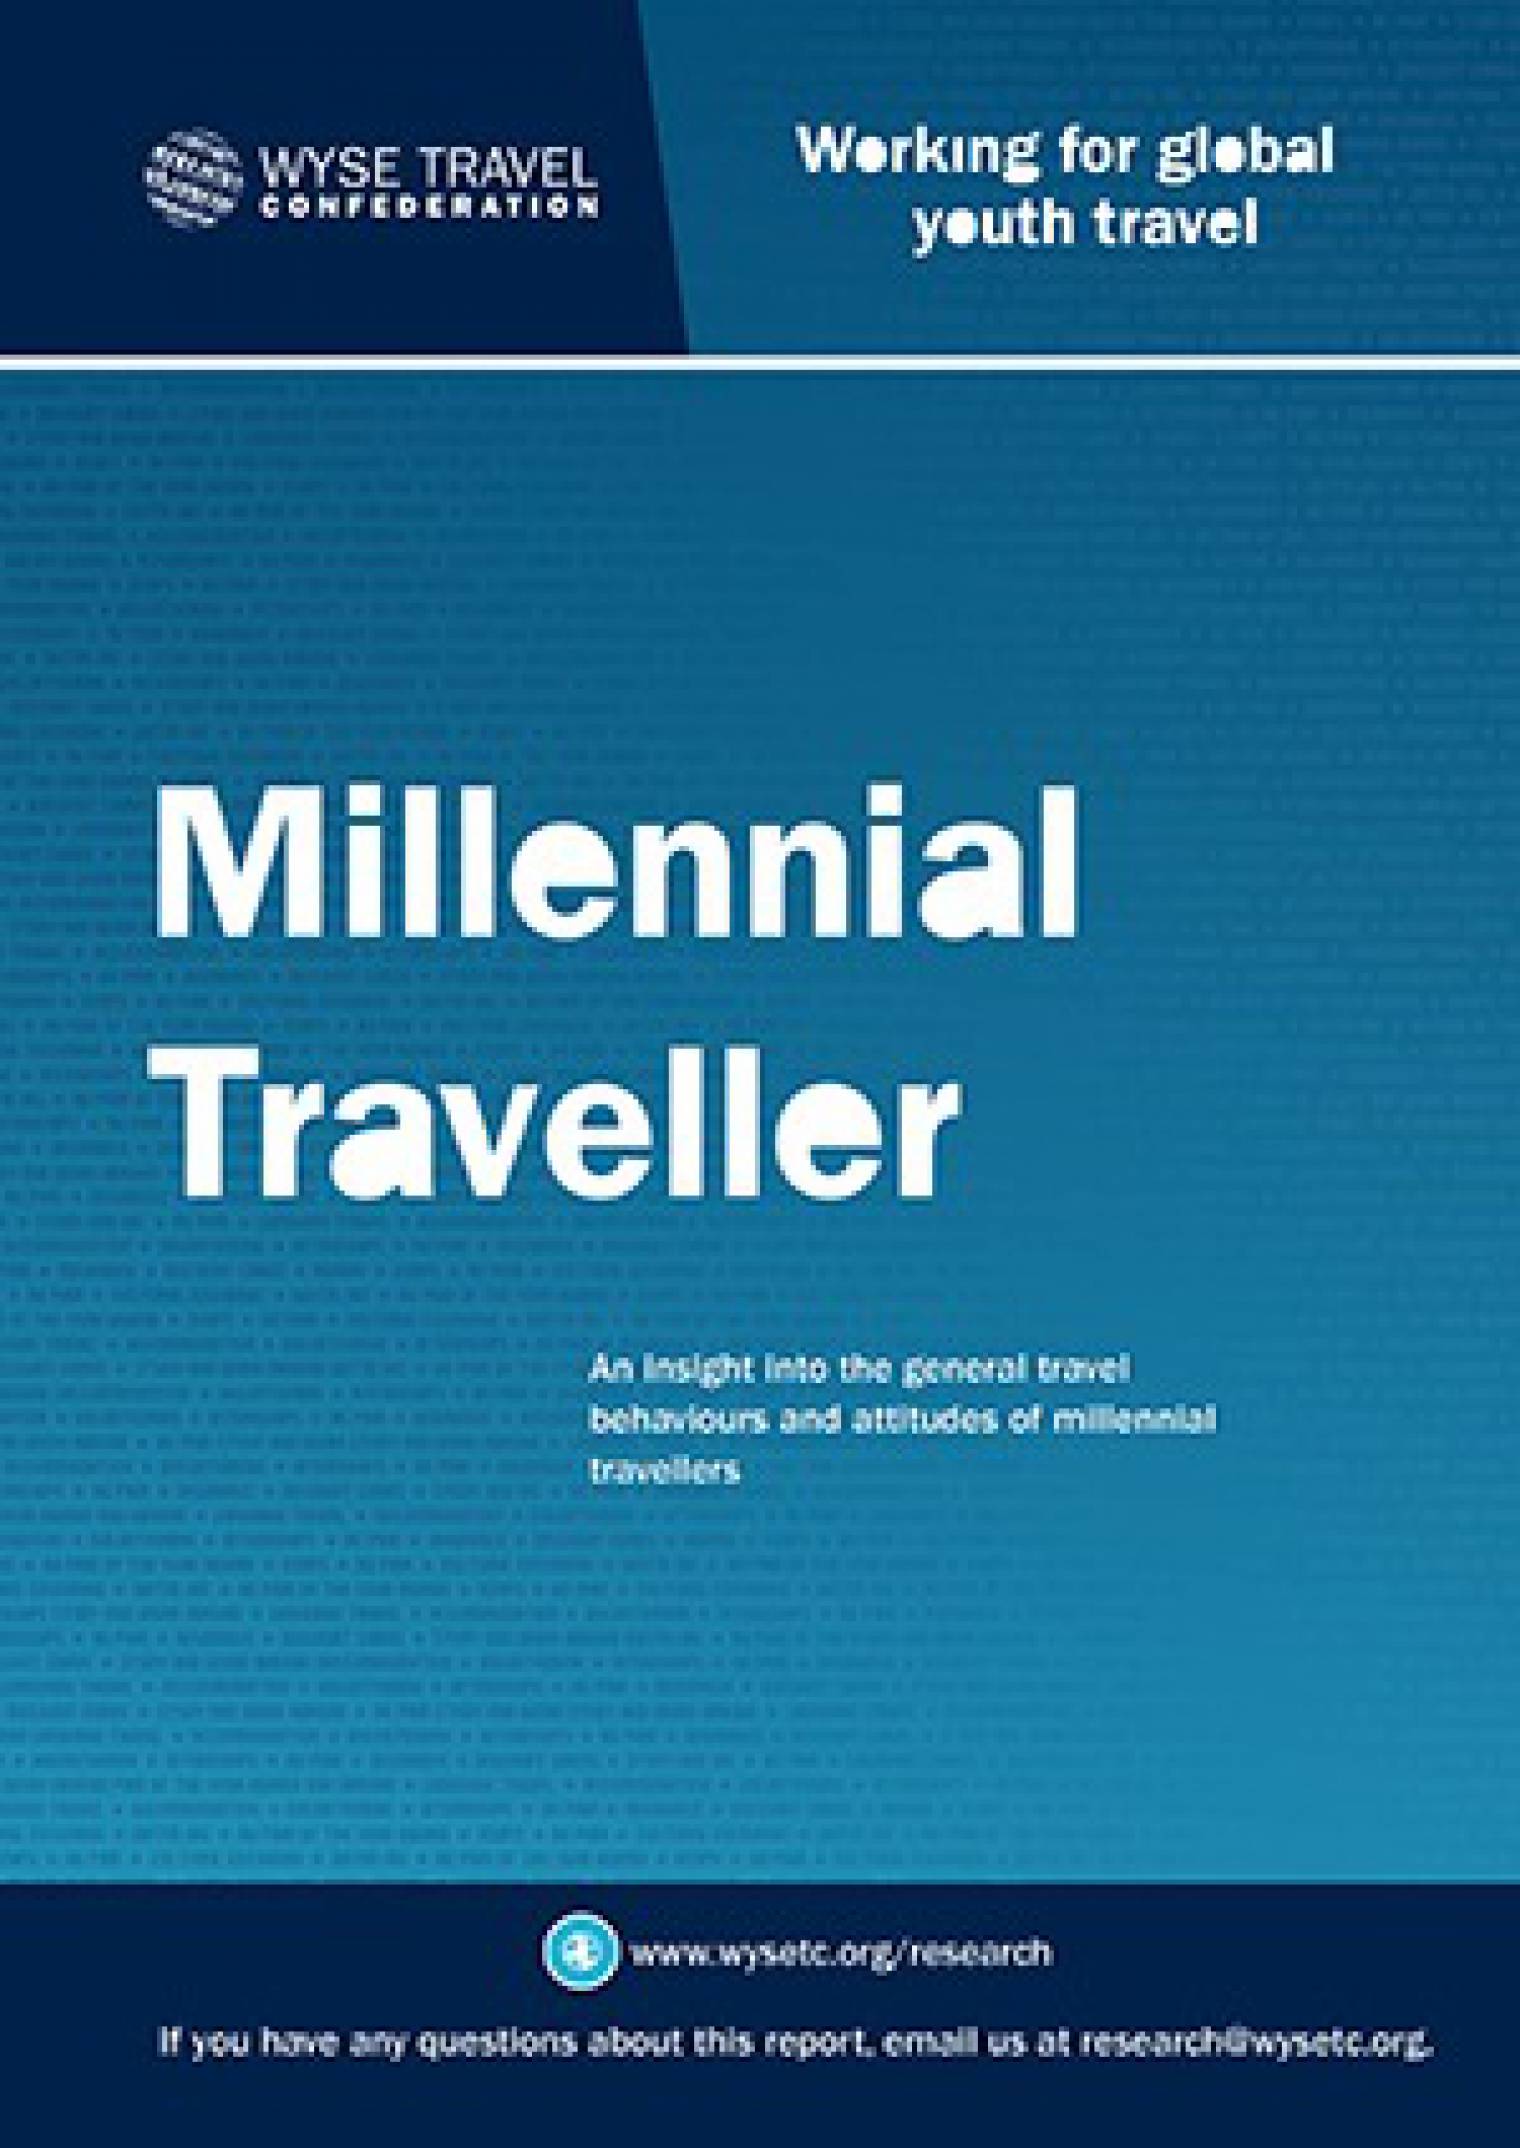 New research: Download our Millennial Traveller report for a unique insight into this influential generation of travellers